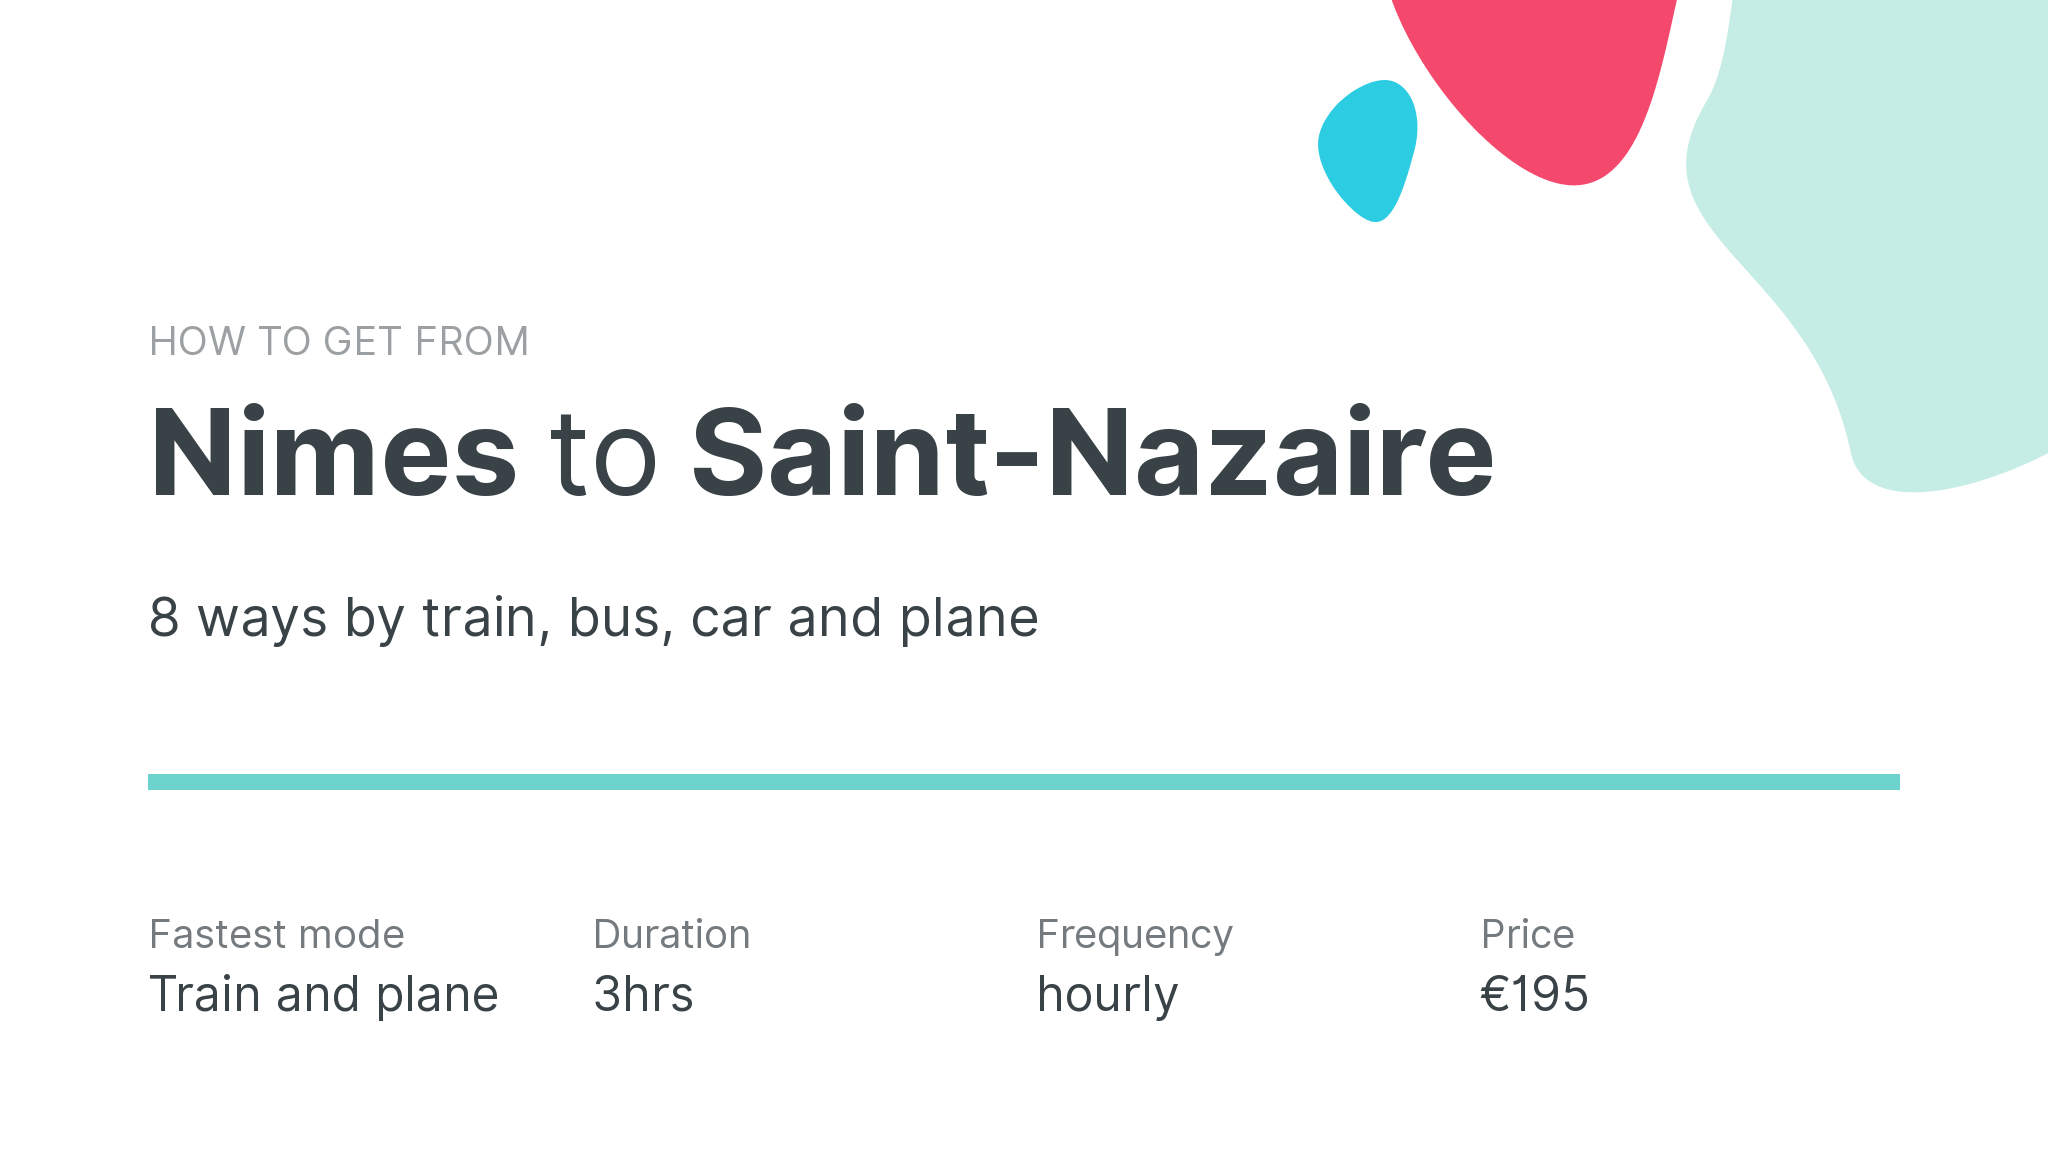 How do I get from Nimes to Saint-Nazaire